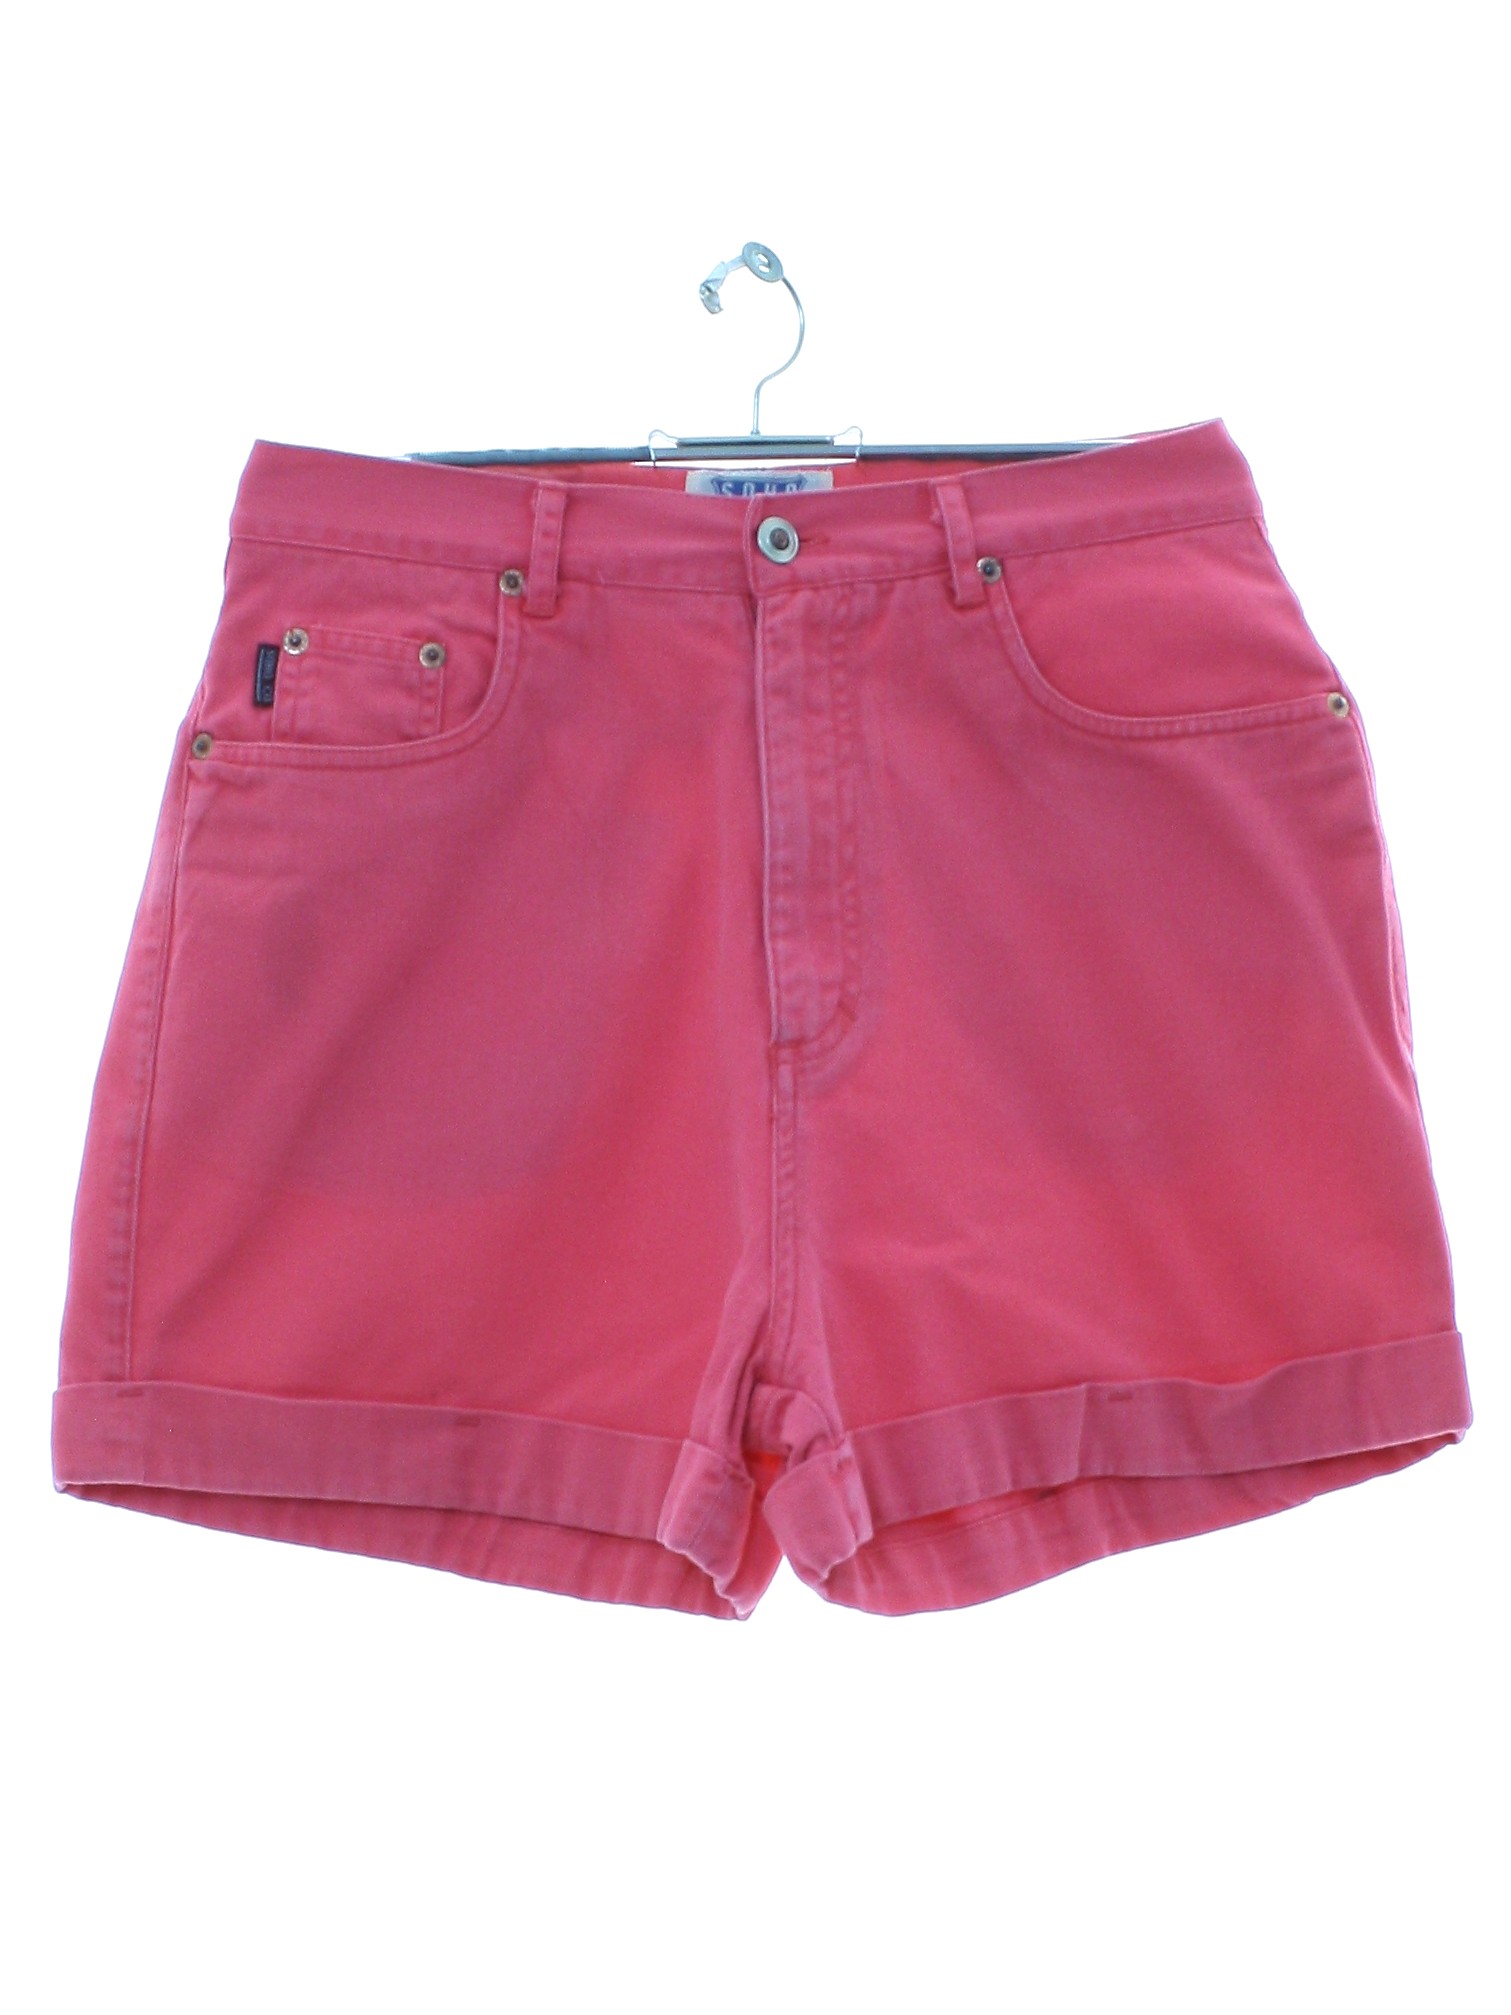 Vintage 1990's Shorts: 90s -SOHO Campagne- Womens coral-pink cotton ...